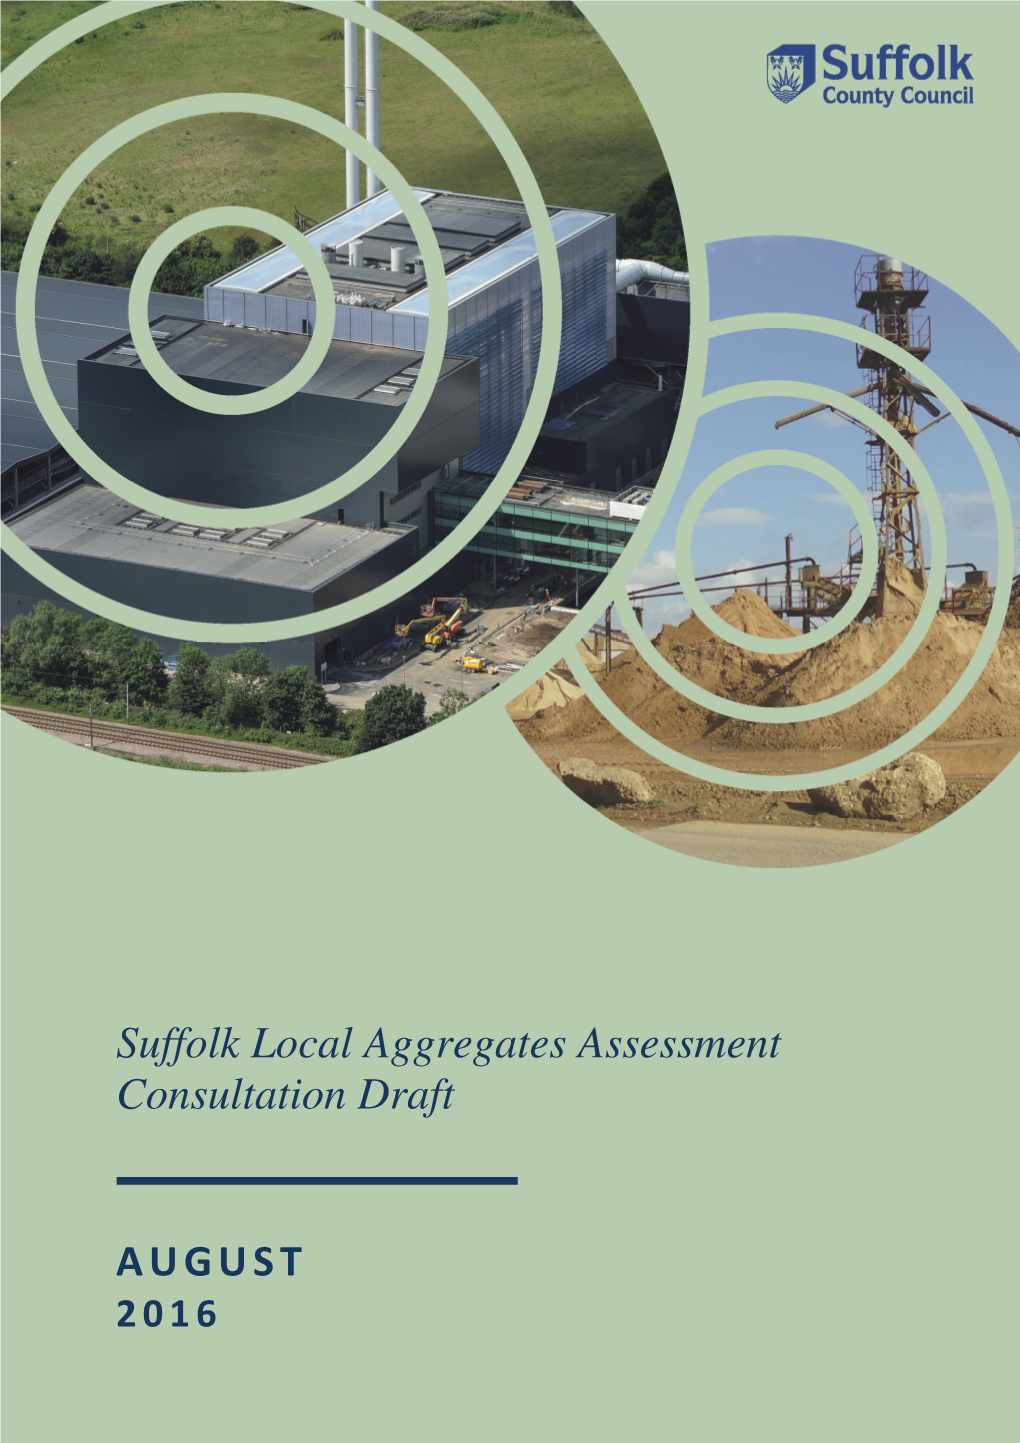 Suffolk Local Aggregates Assessment Consultation Draft AUGUST